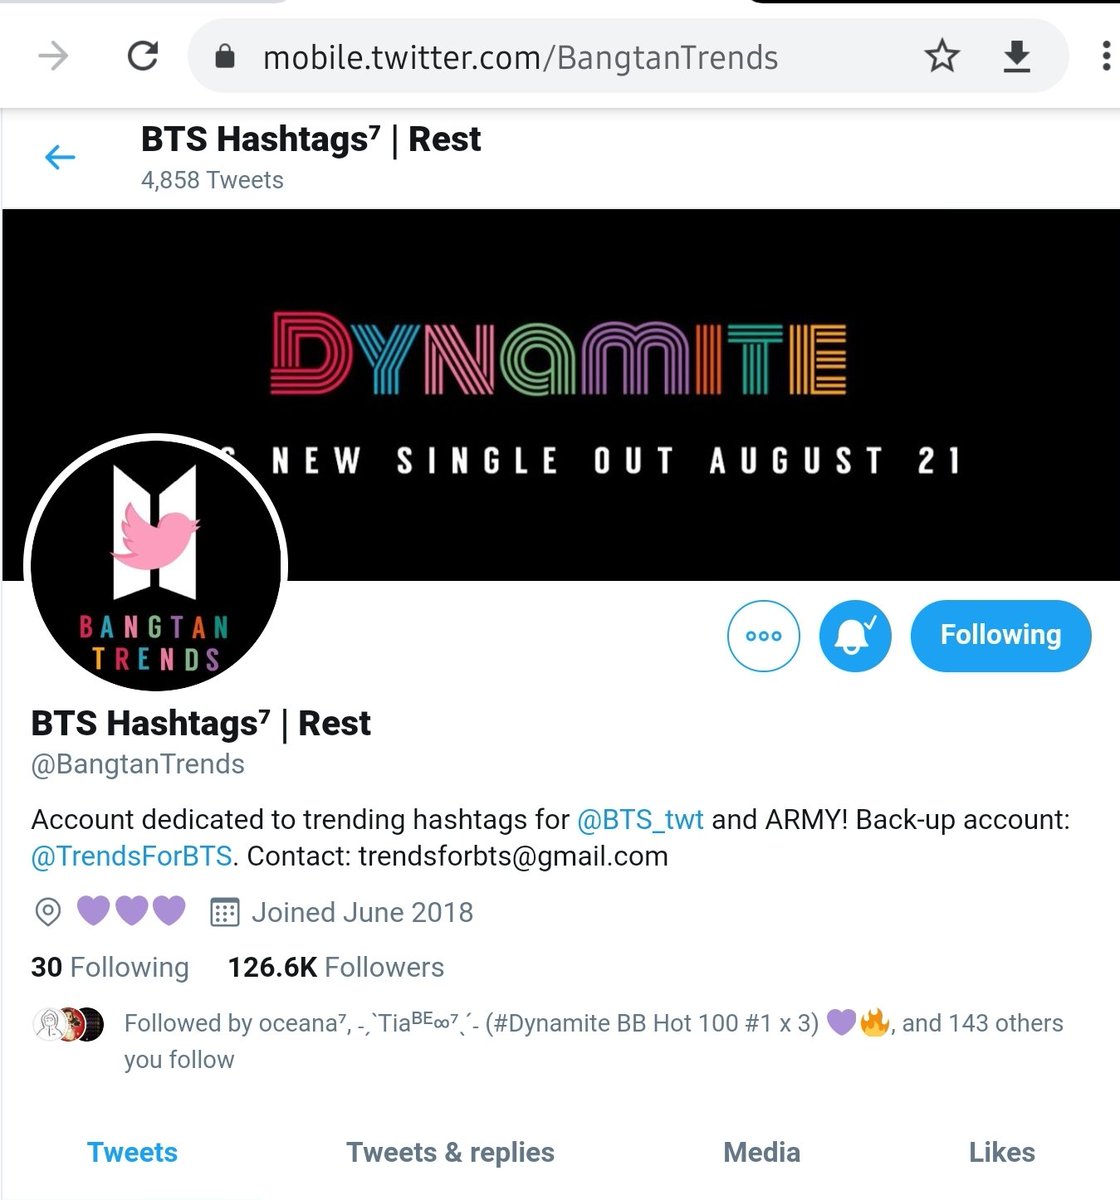 Interested in BTS' Chart Domination? -  @btschartdata How about Korean Charts? -  @charts_kInterested in BTS Worldwide Trends? -  @BangtanTrends Guidance, Tutorial and information on Voting for  #BTS? -  @btsvotingorg   #BTSARMY  @BTS_twt